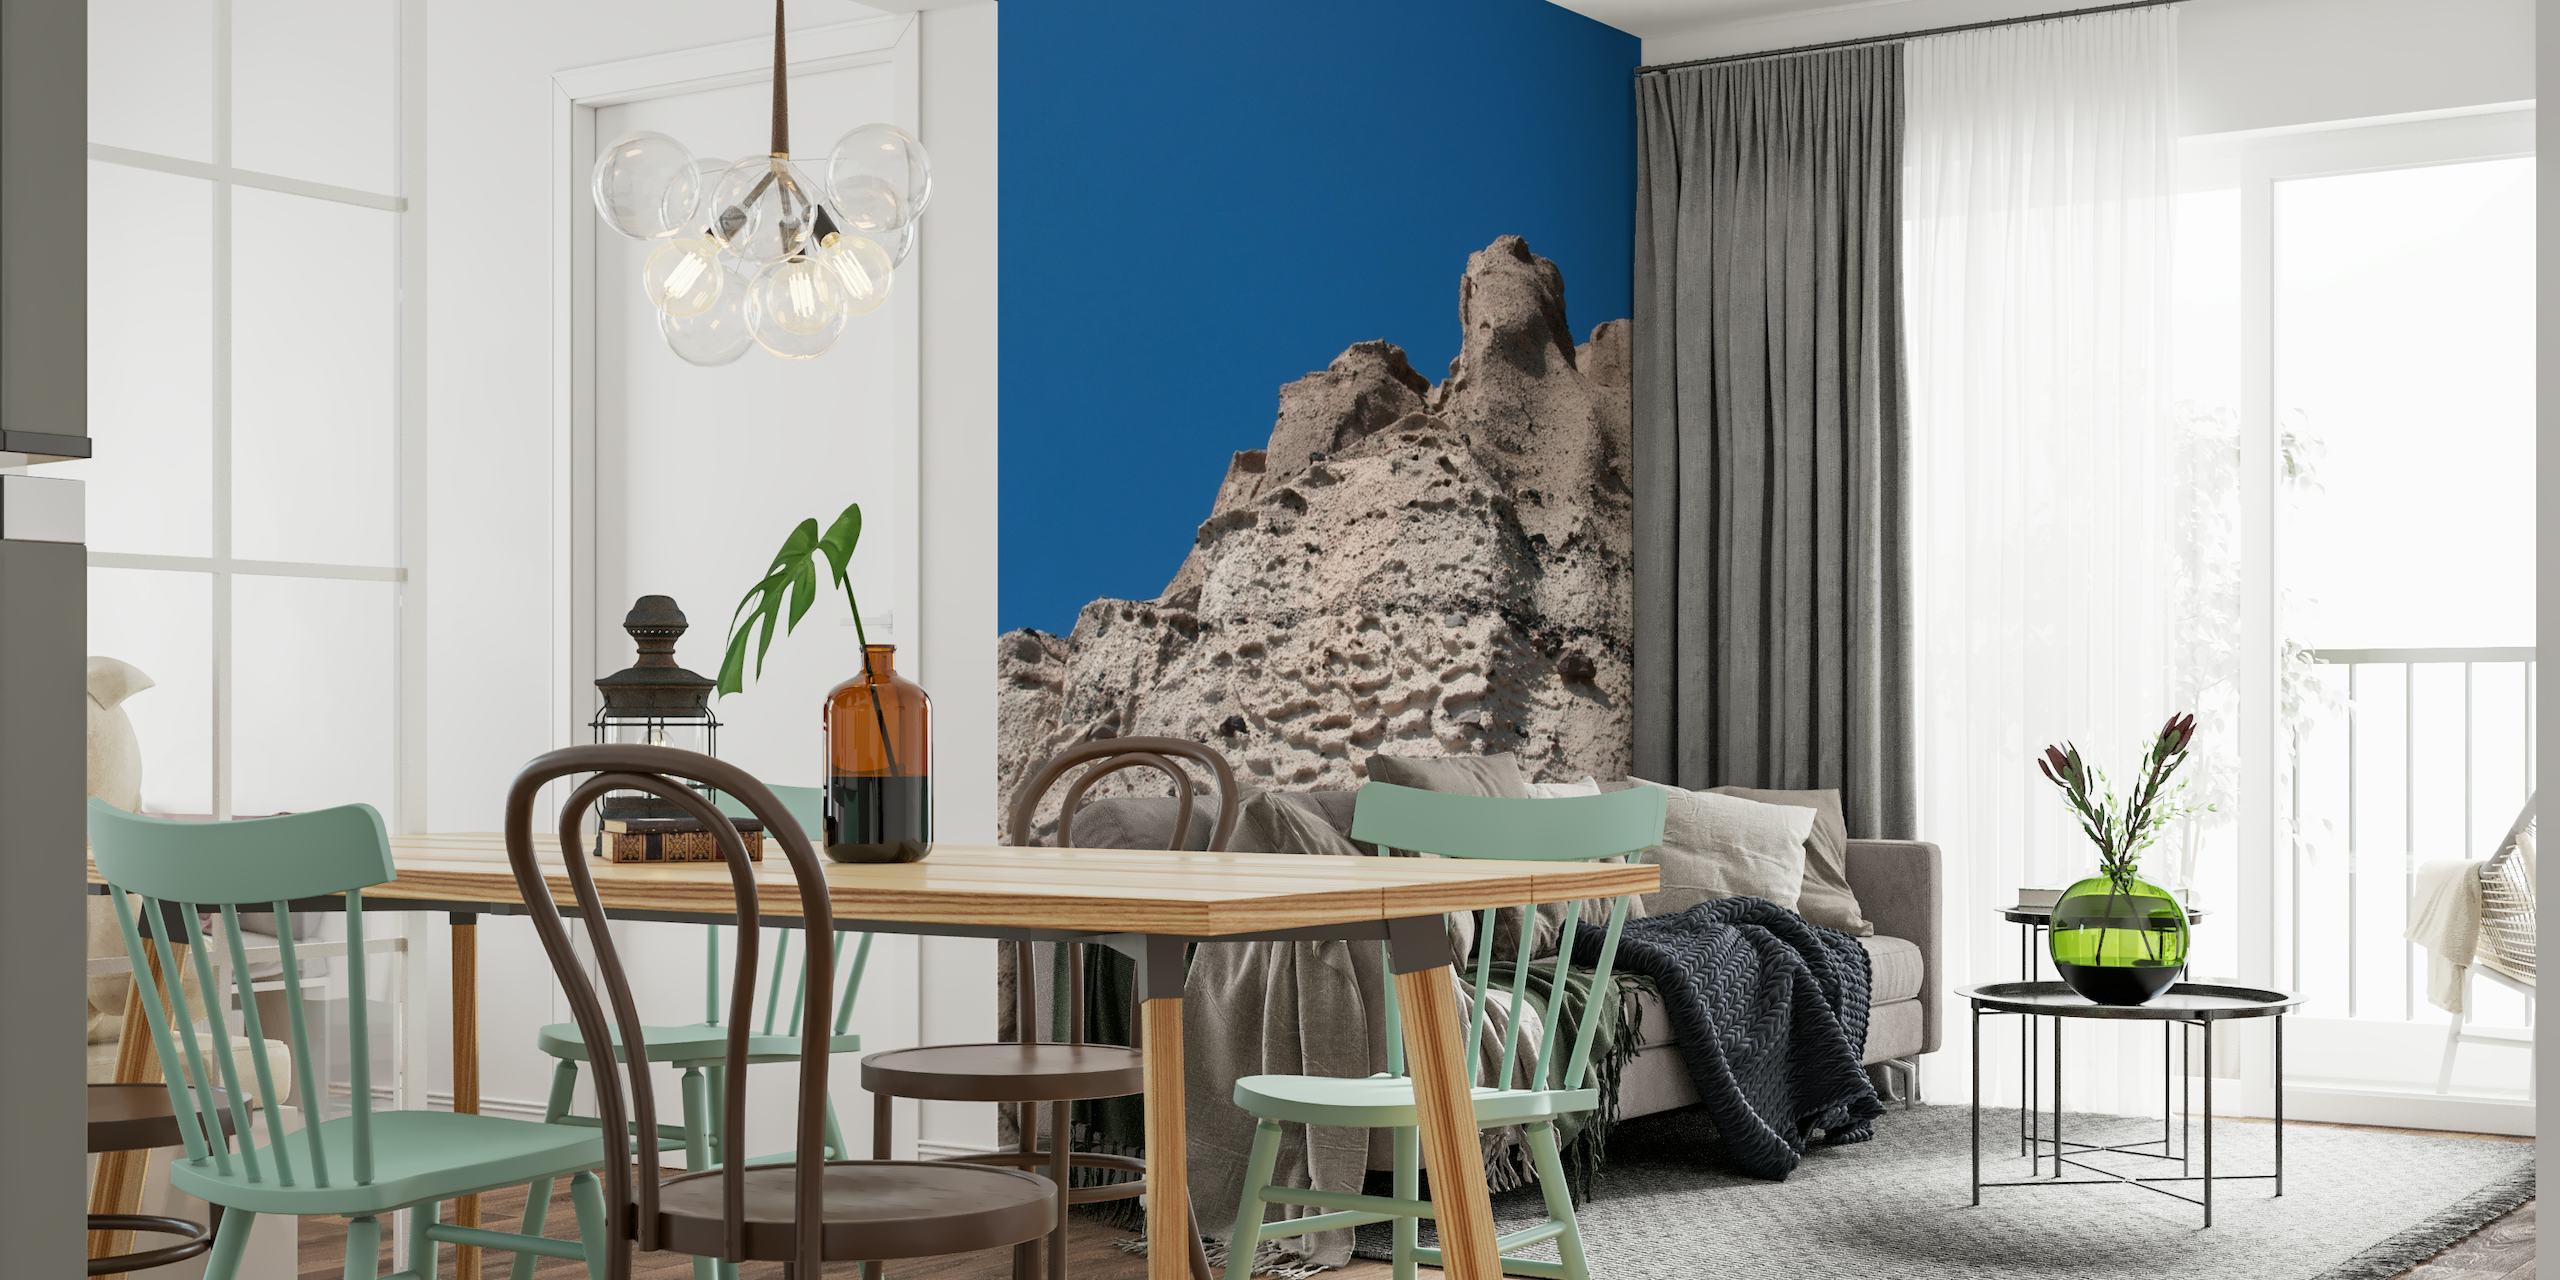 Santorini volcanic cliff wall mural with textured earthy tones